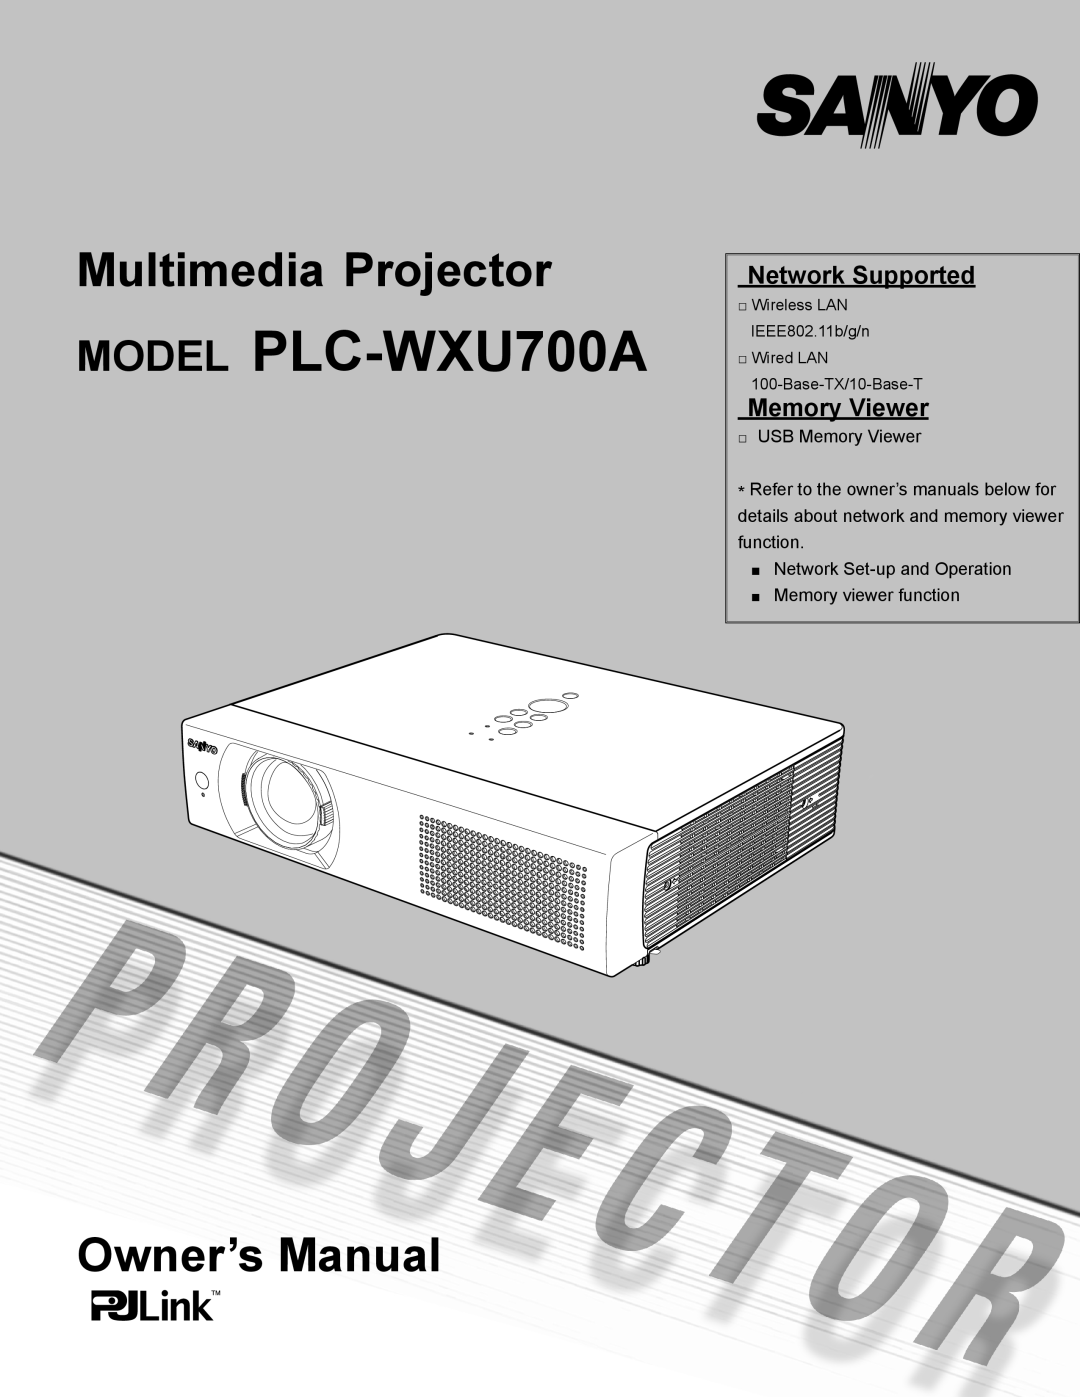 Sanyo owner manual Network Supported, Memory Viewer, MODEL PLC-WXU700A, Multimedia Projector, Owner’s Manual 